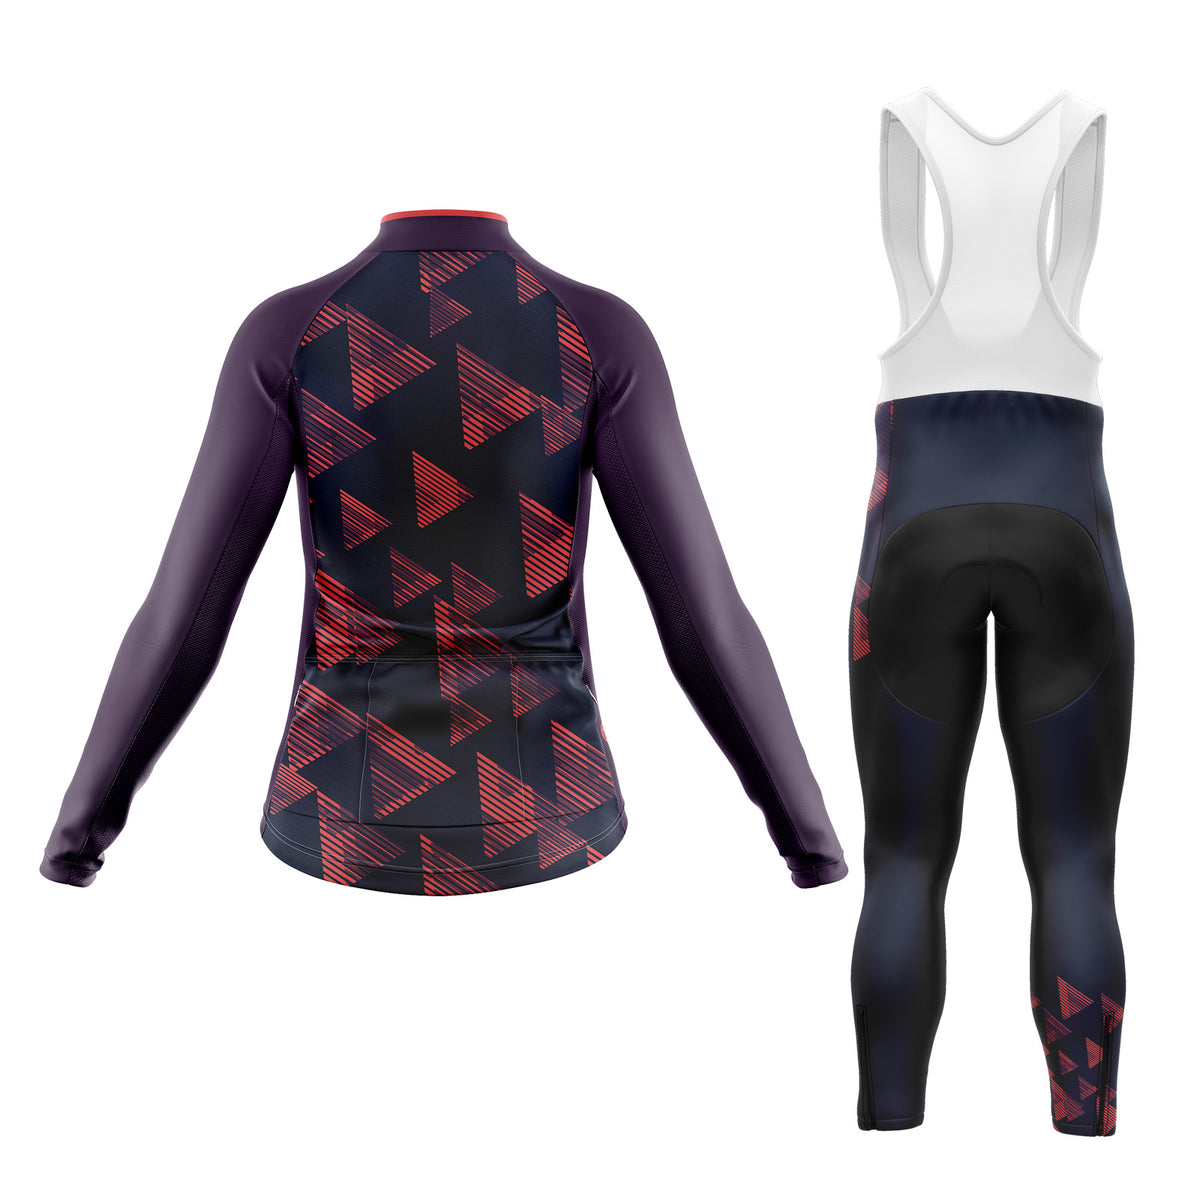 Triangles from Space | Women's Long Sleeve Cycling Set